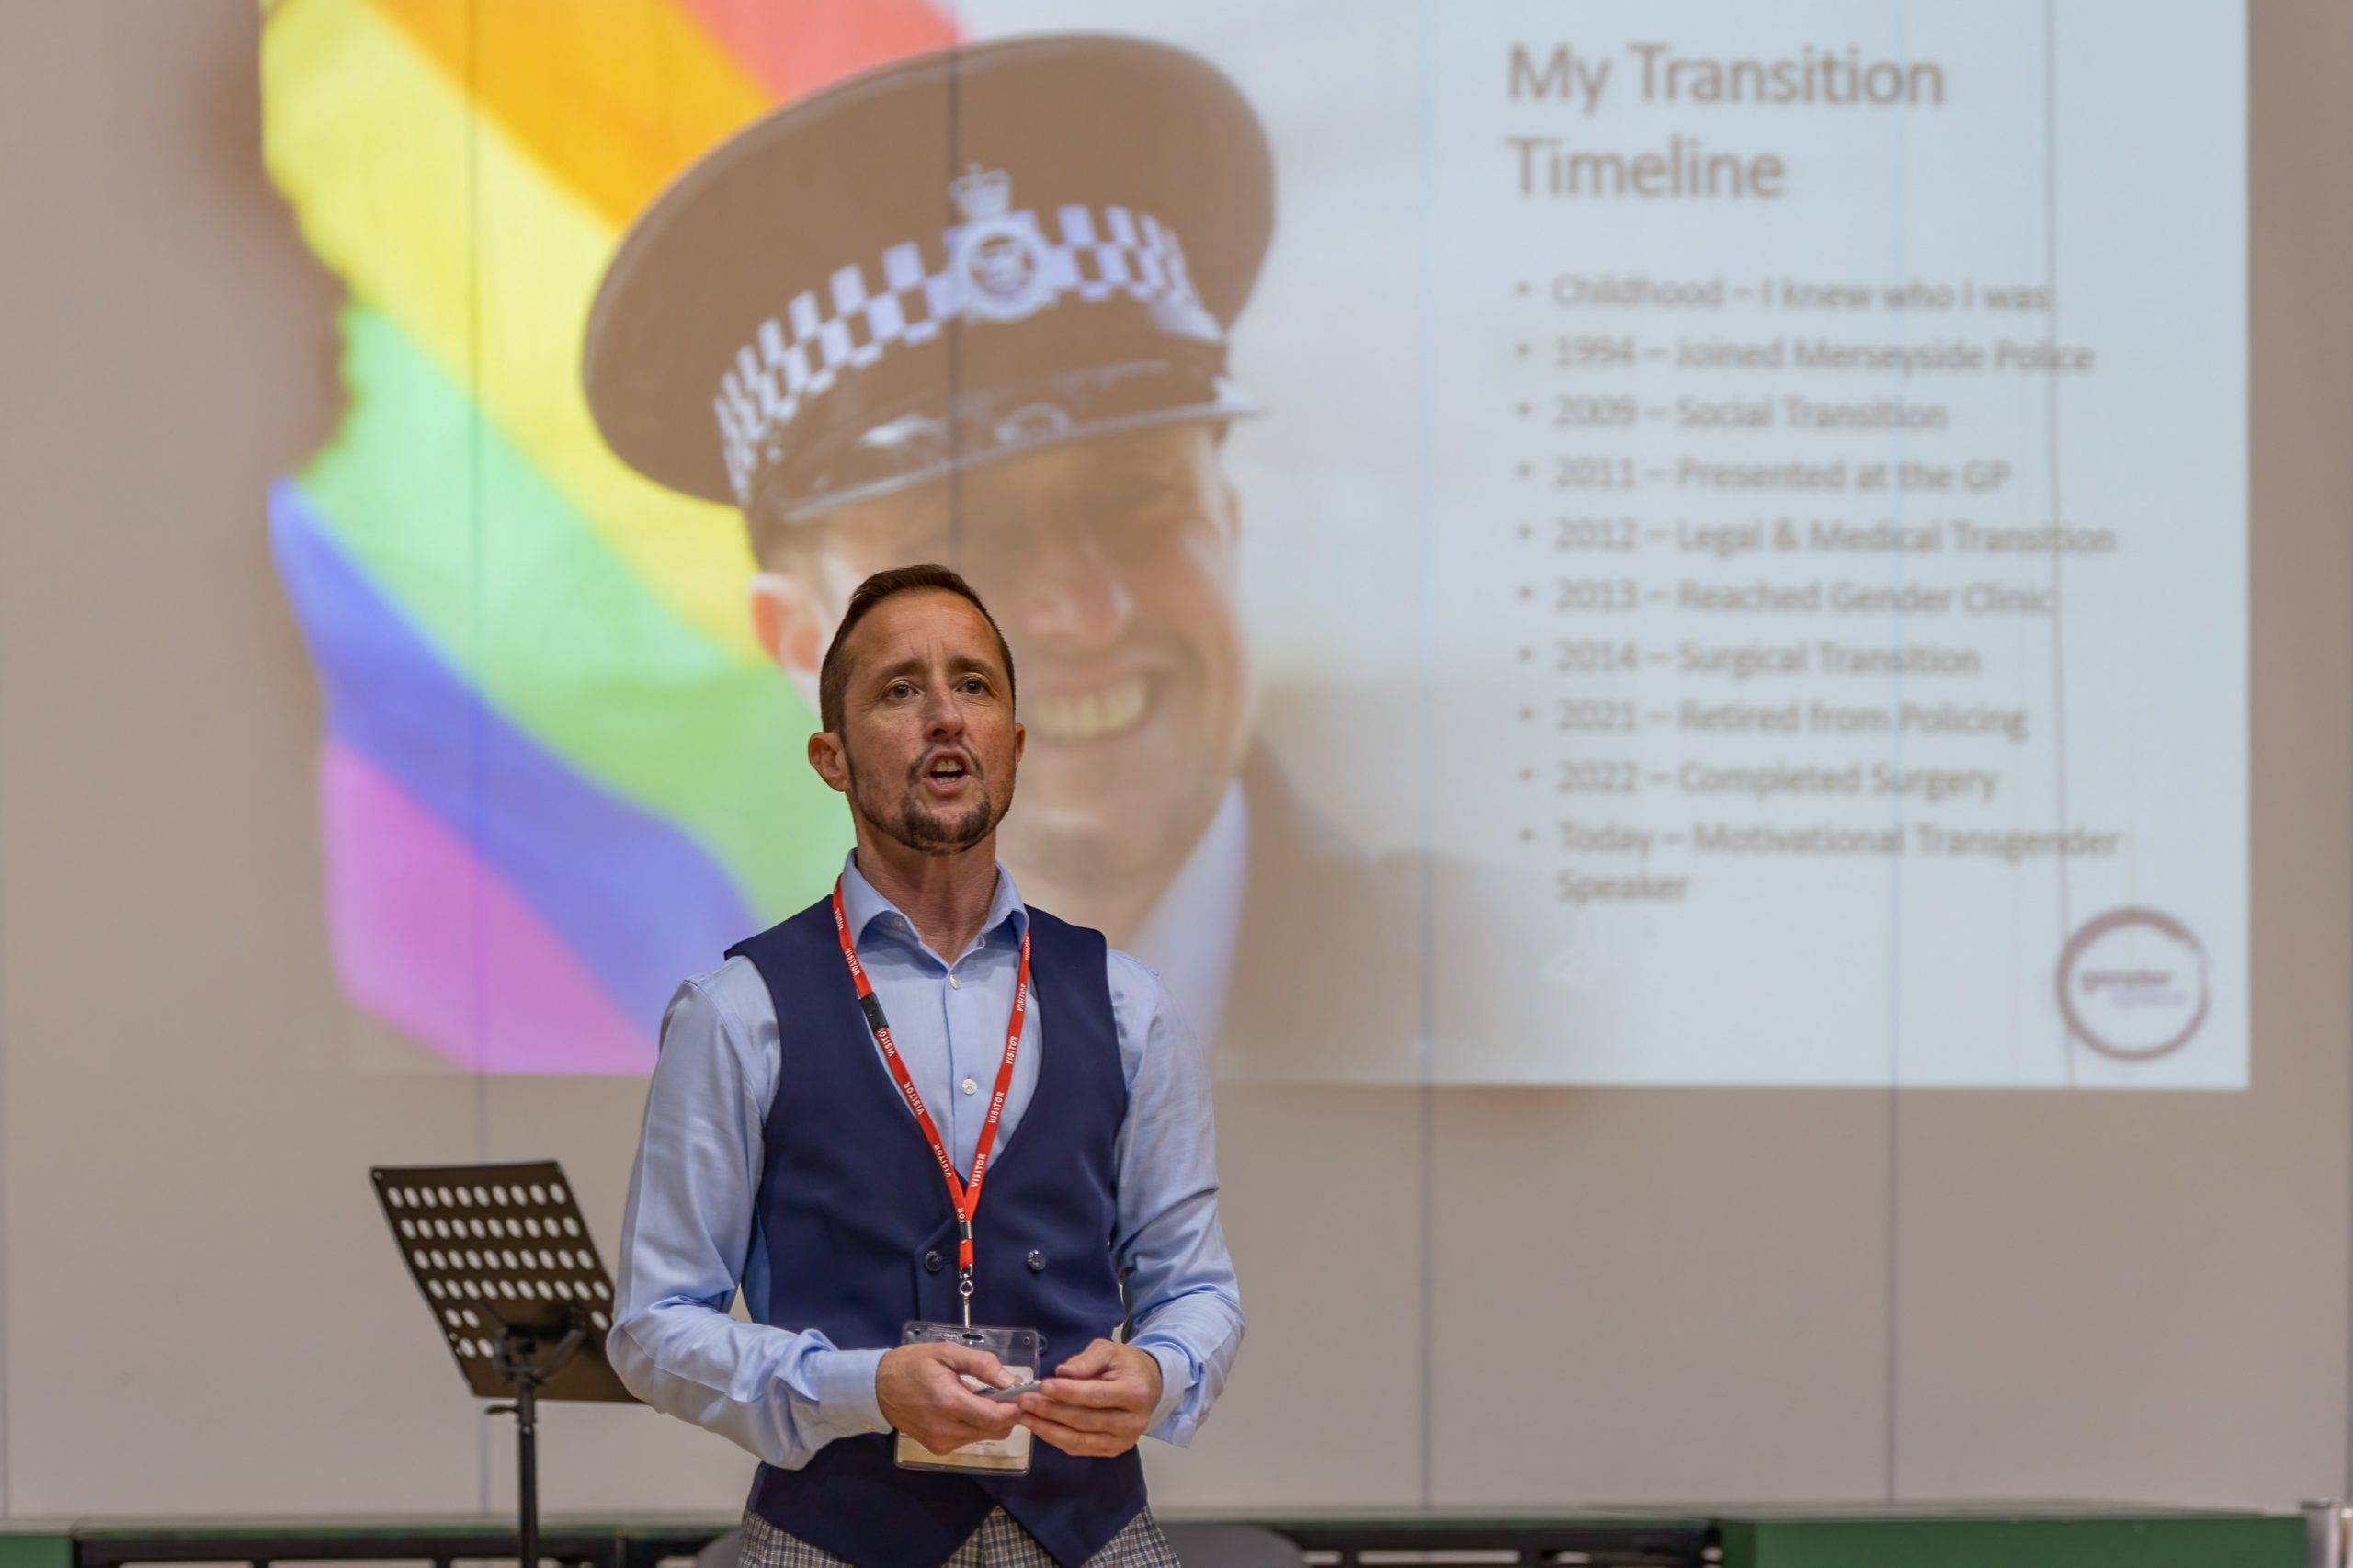 Christian Owens took to the stage at Rainford High's conference